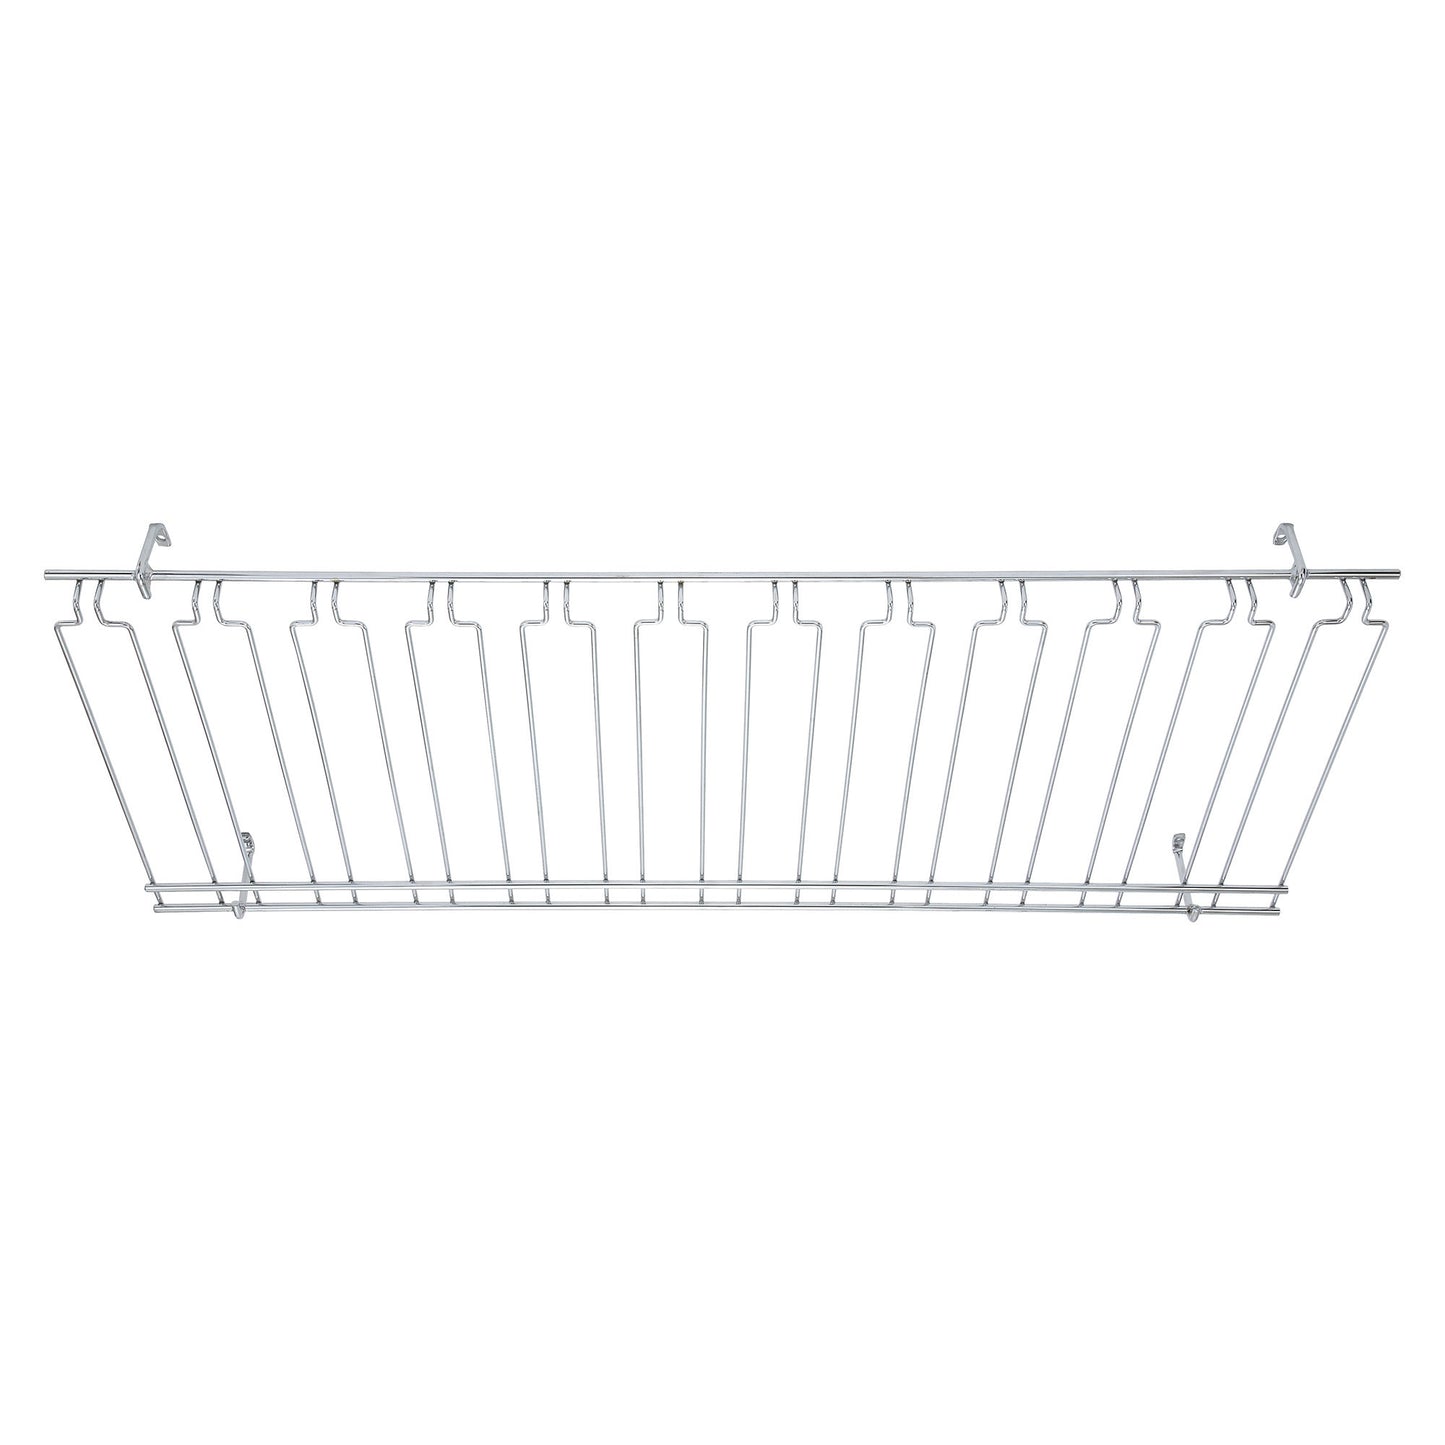 GHC-1848 - 11 Channel Overhead Glass Hanger